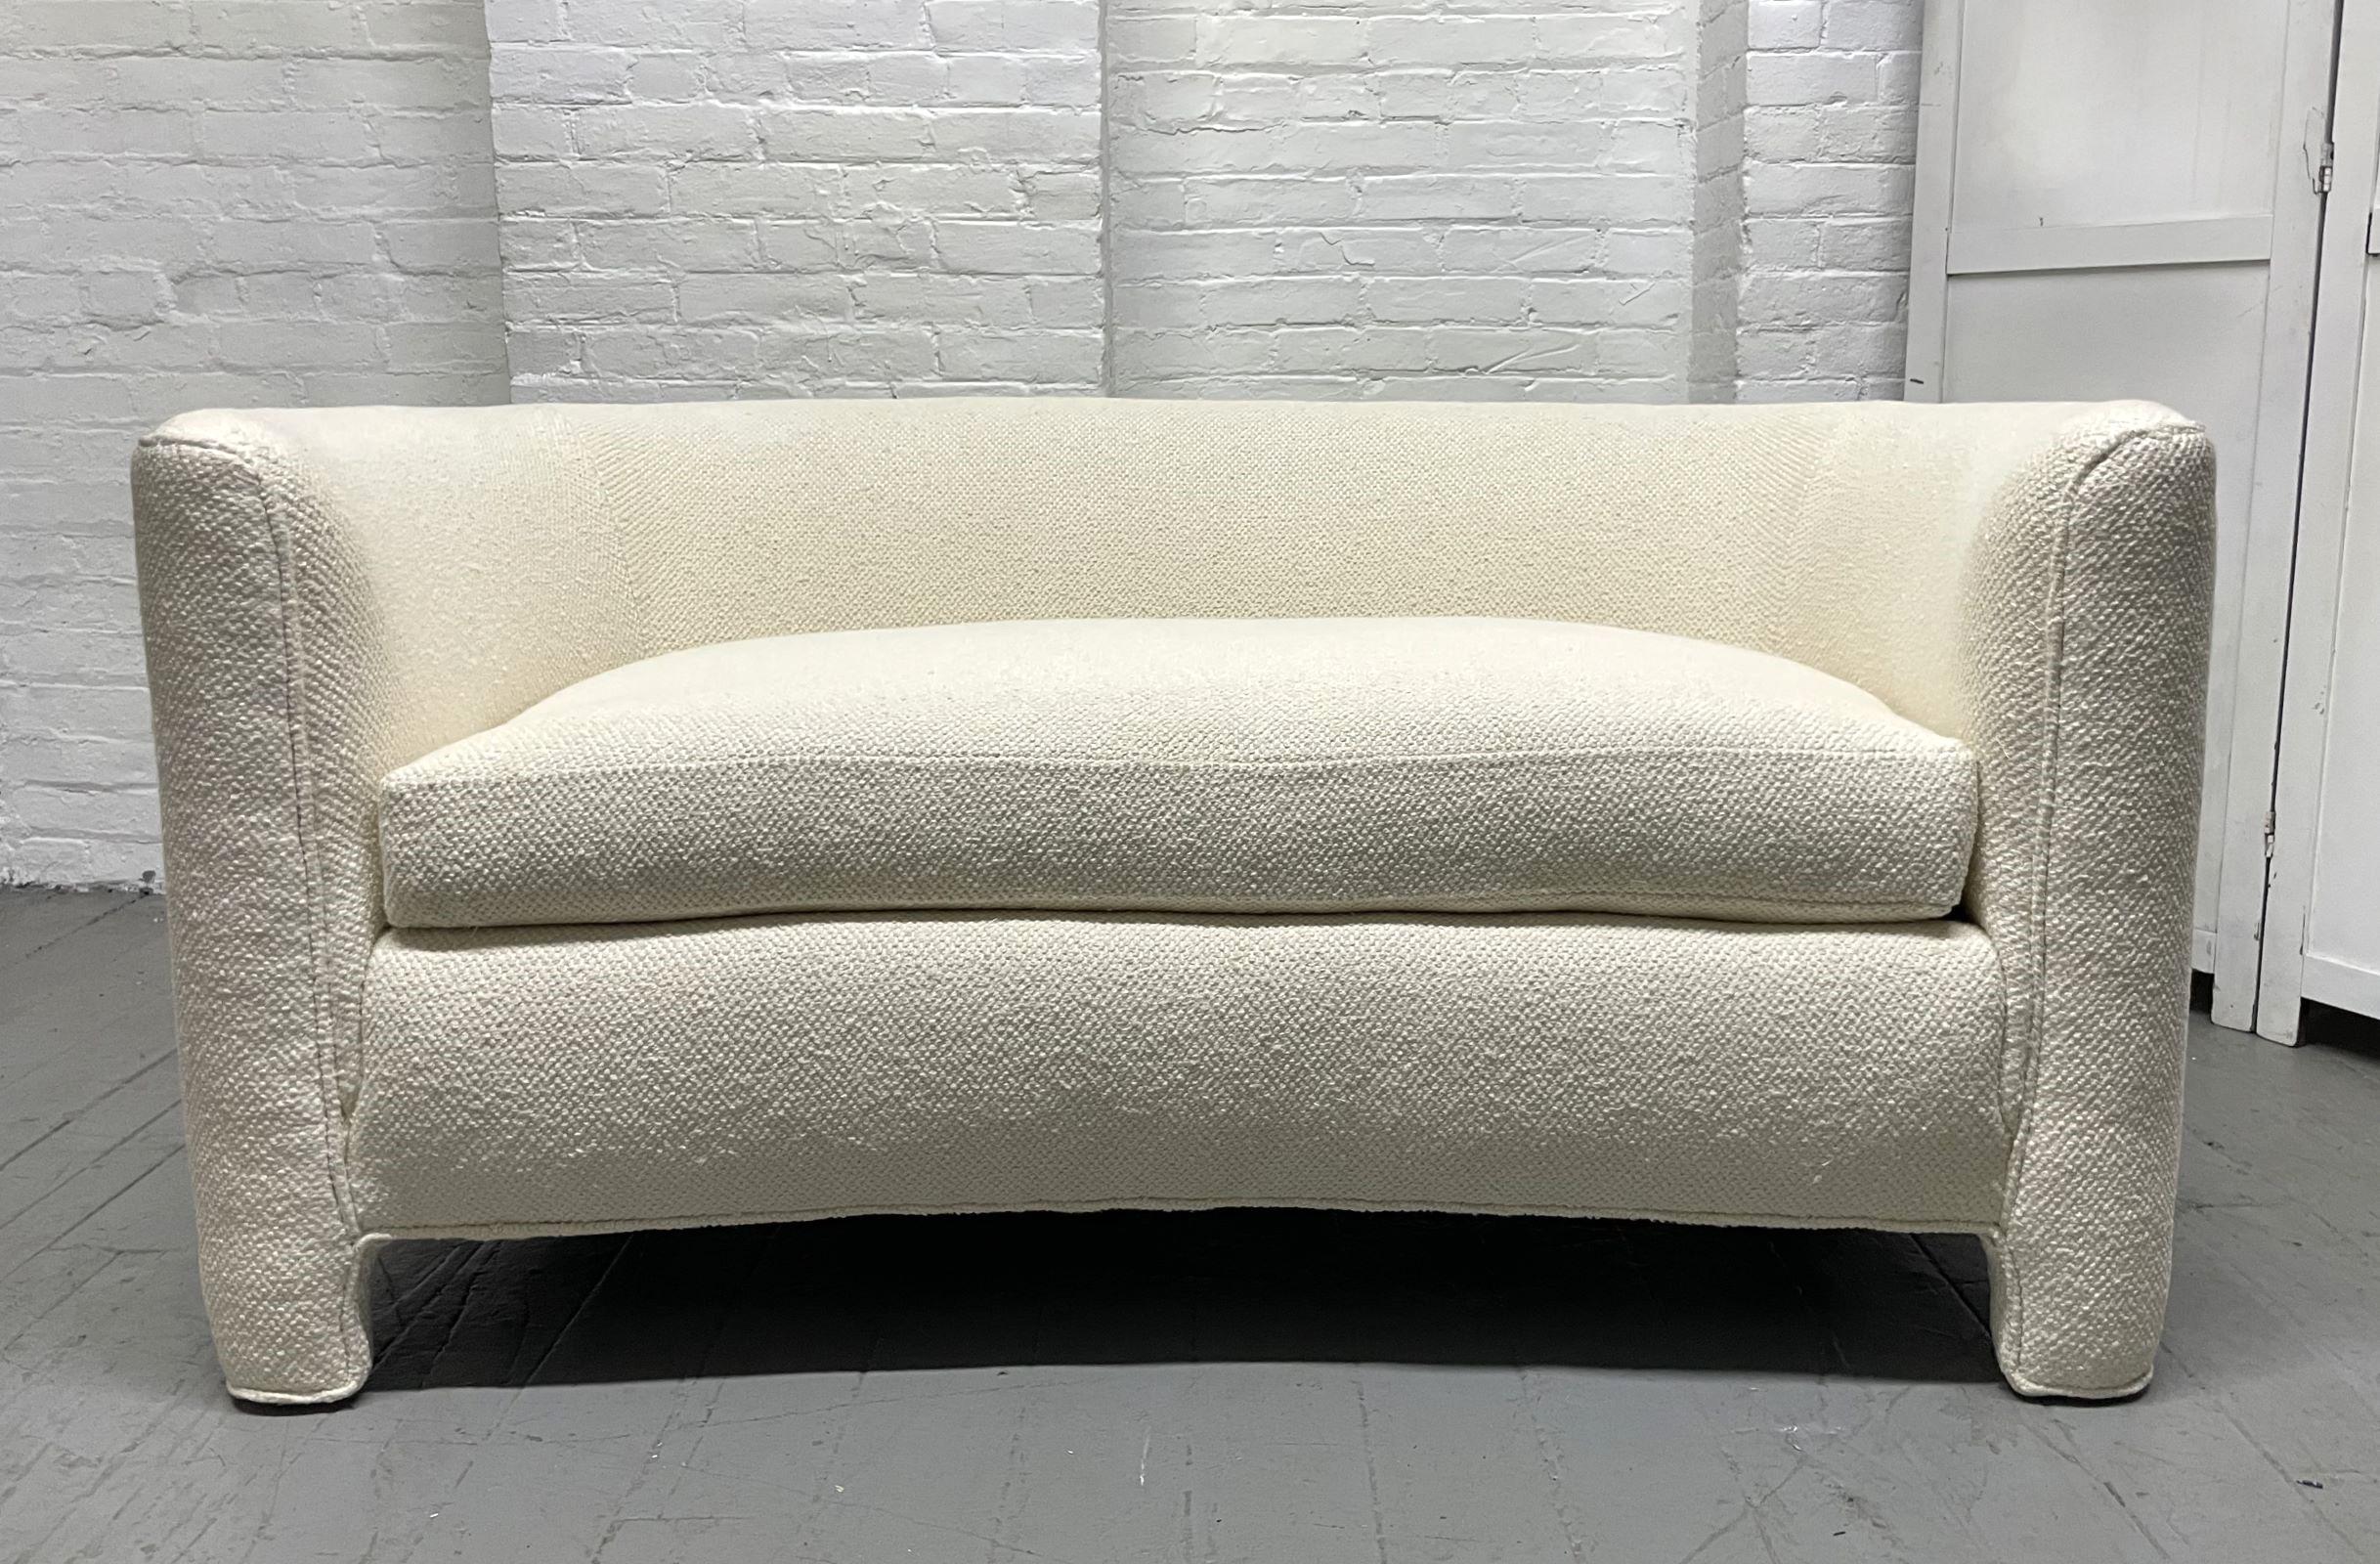 Mid-Century Modern Loveseat in Bouclé fabric. This loveseat is very comfortable.